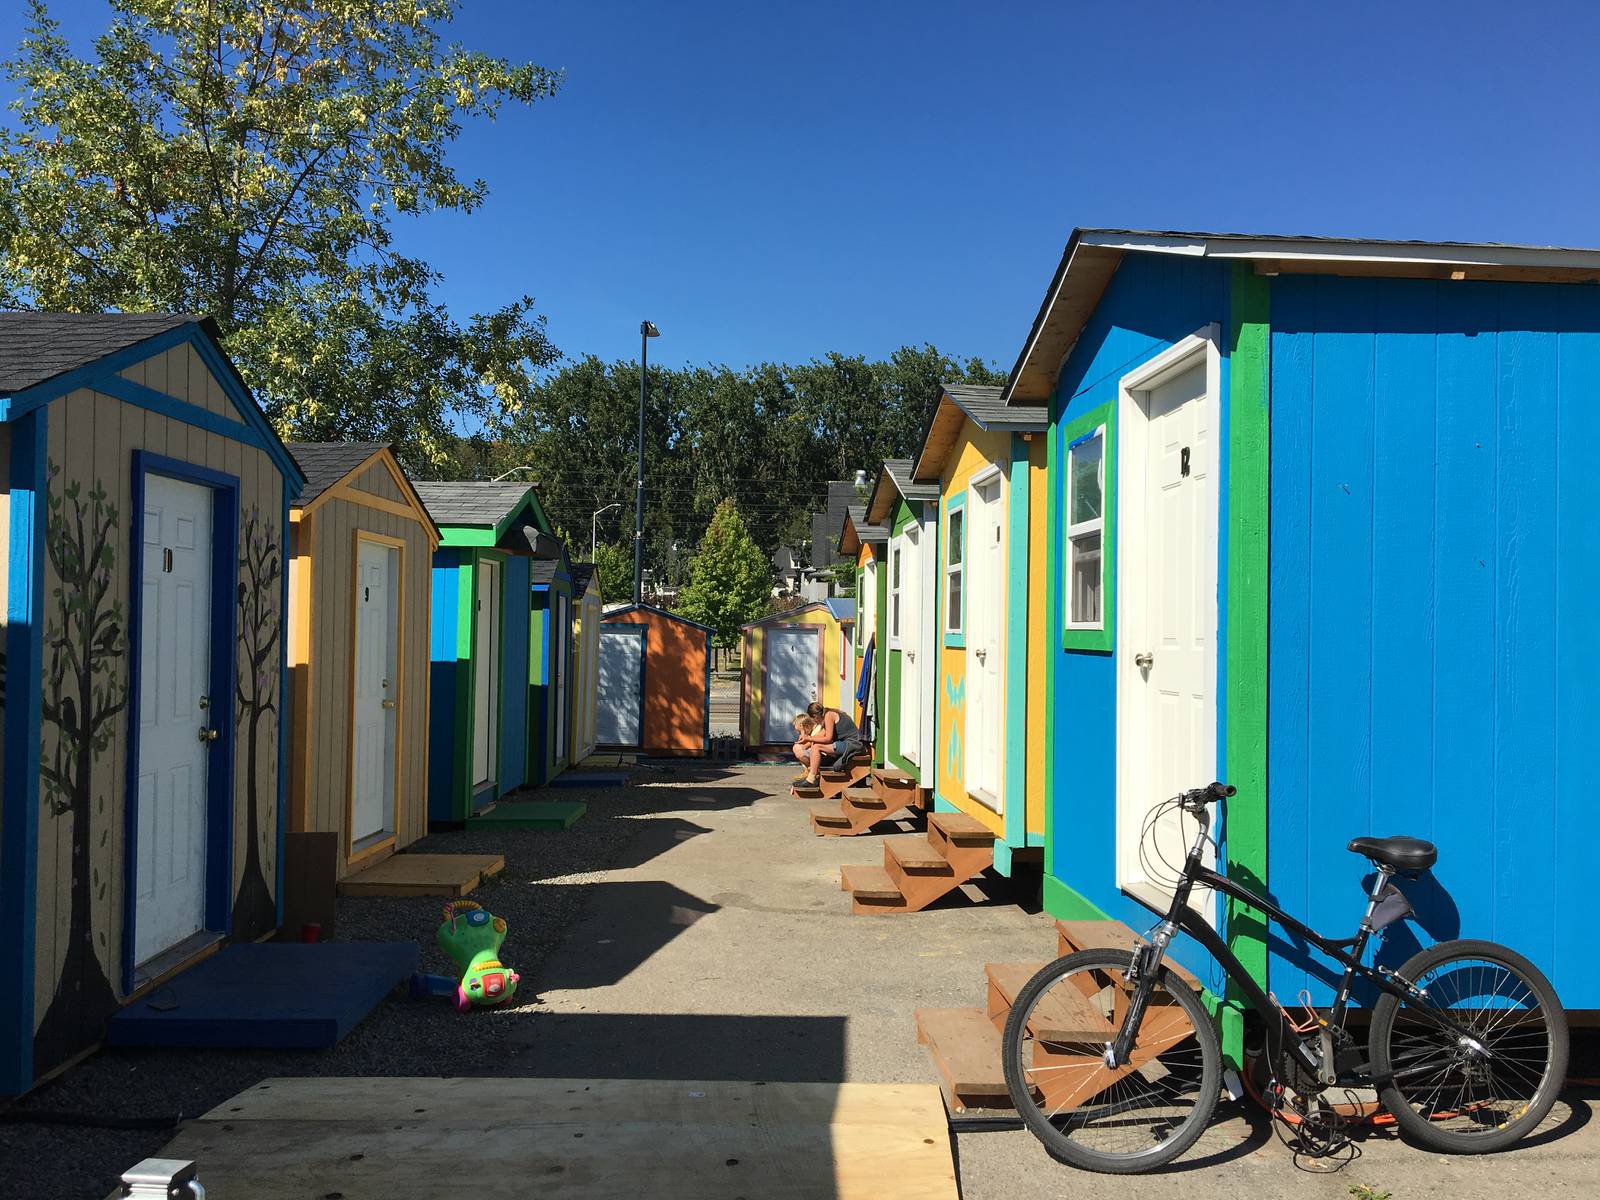 1 000 New Tiny Homes Could Soon Be Built In Seattle At Possible 10m Cost Kiro 7 News Seattle